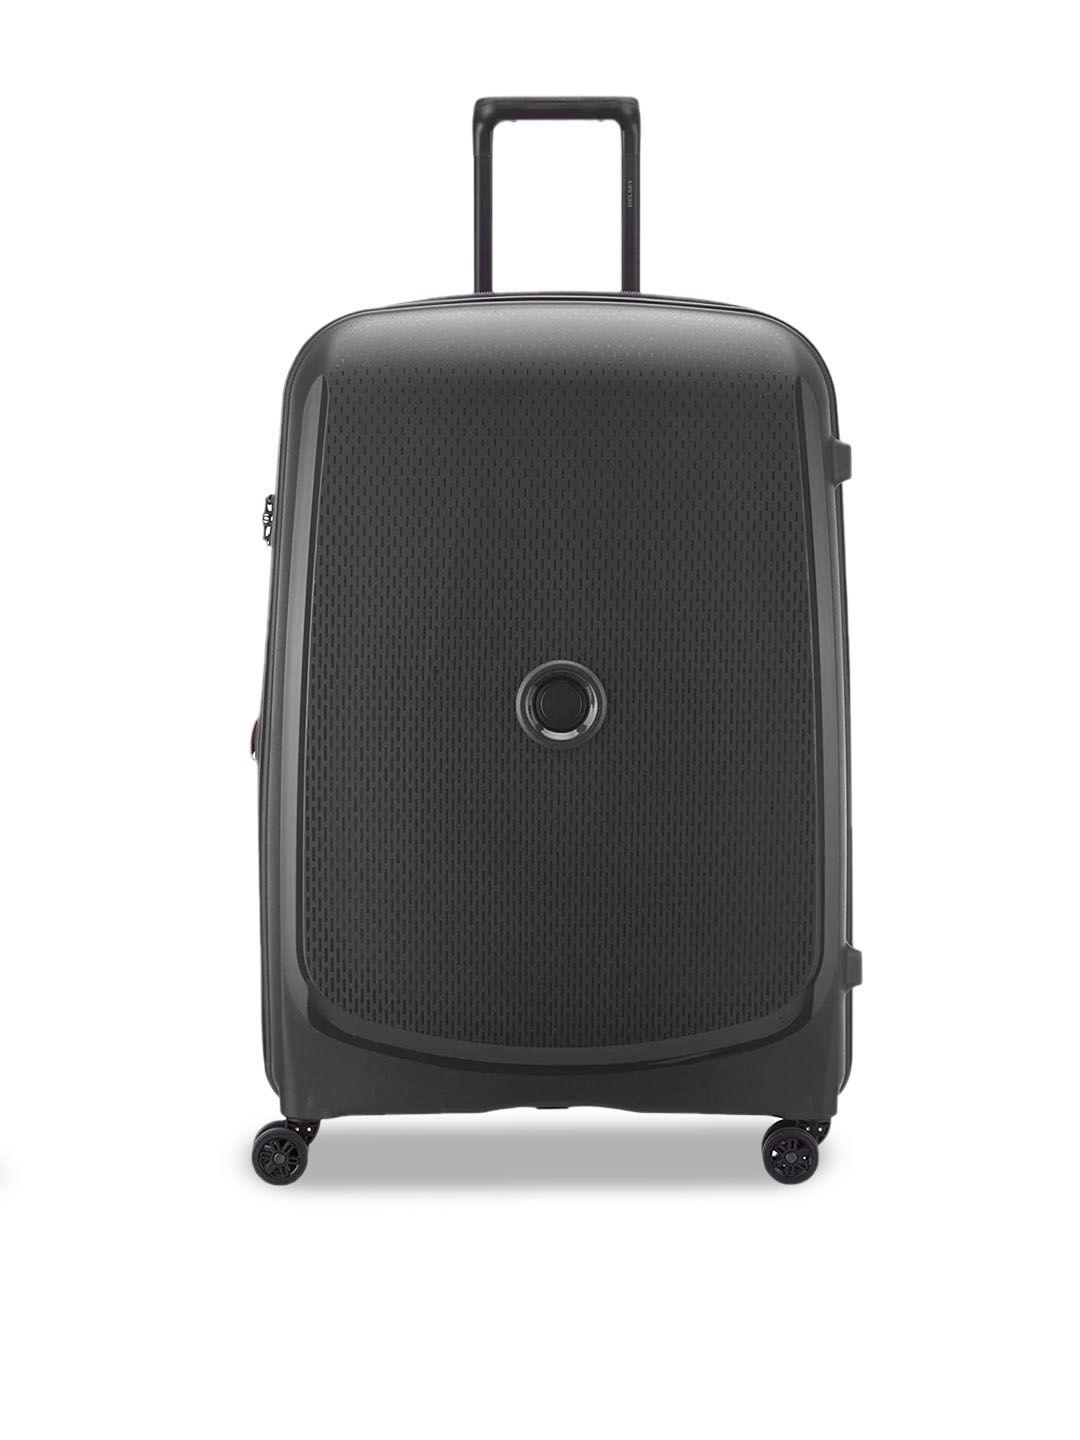 delsey hard-sided large trolley suitcase